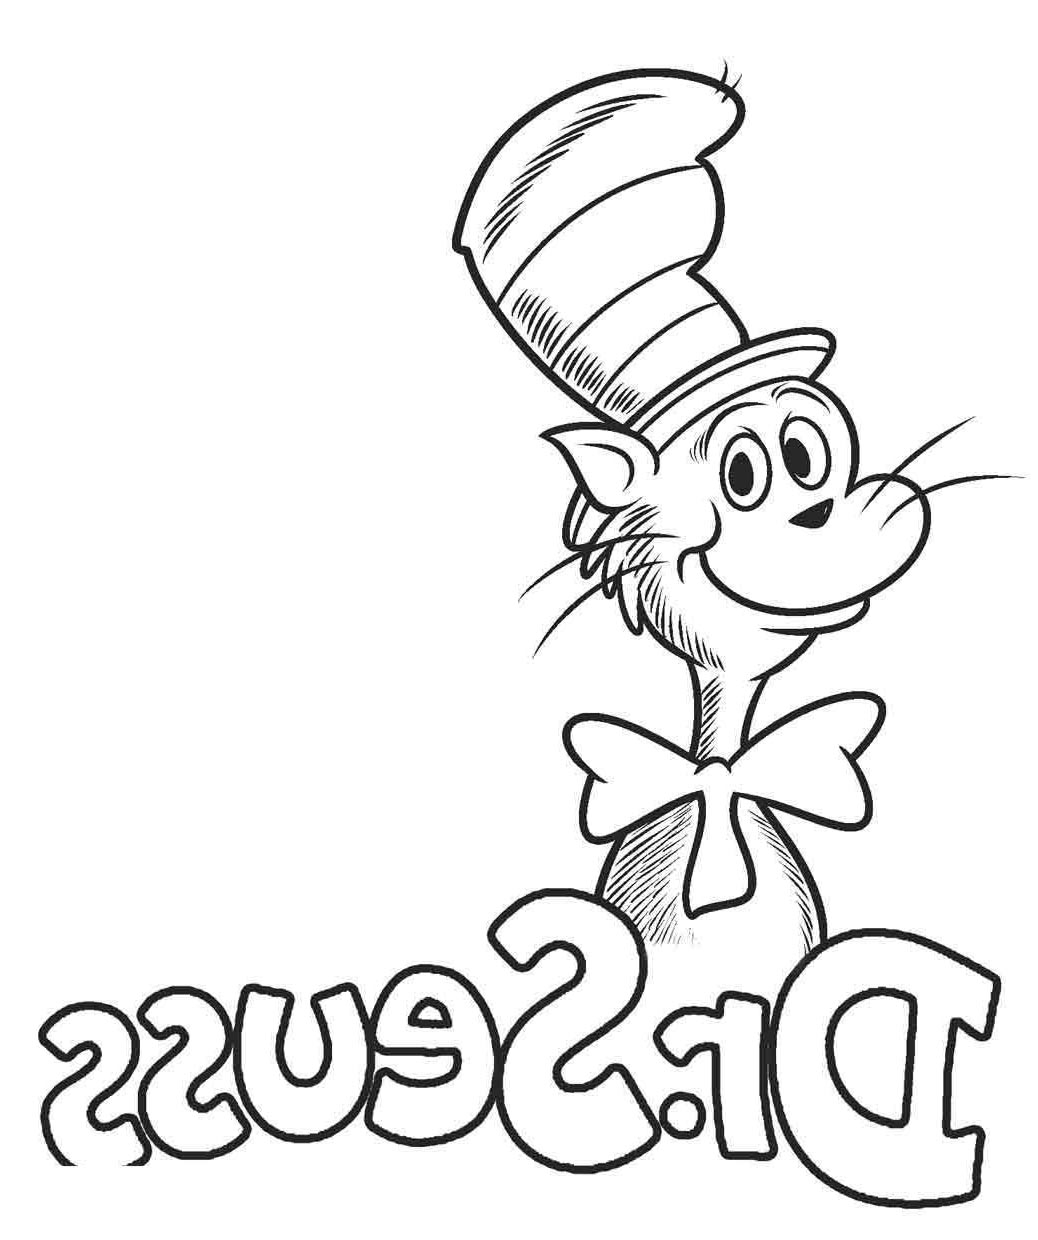 Cat In The Hat Coloring Page Coloring Pages Coloring Pages Cats With Hats Book Youtube Cat In